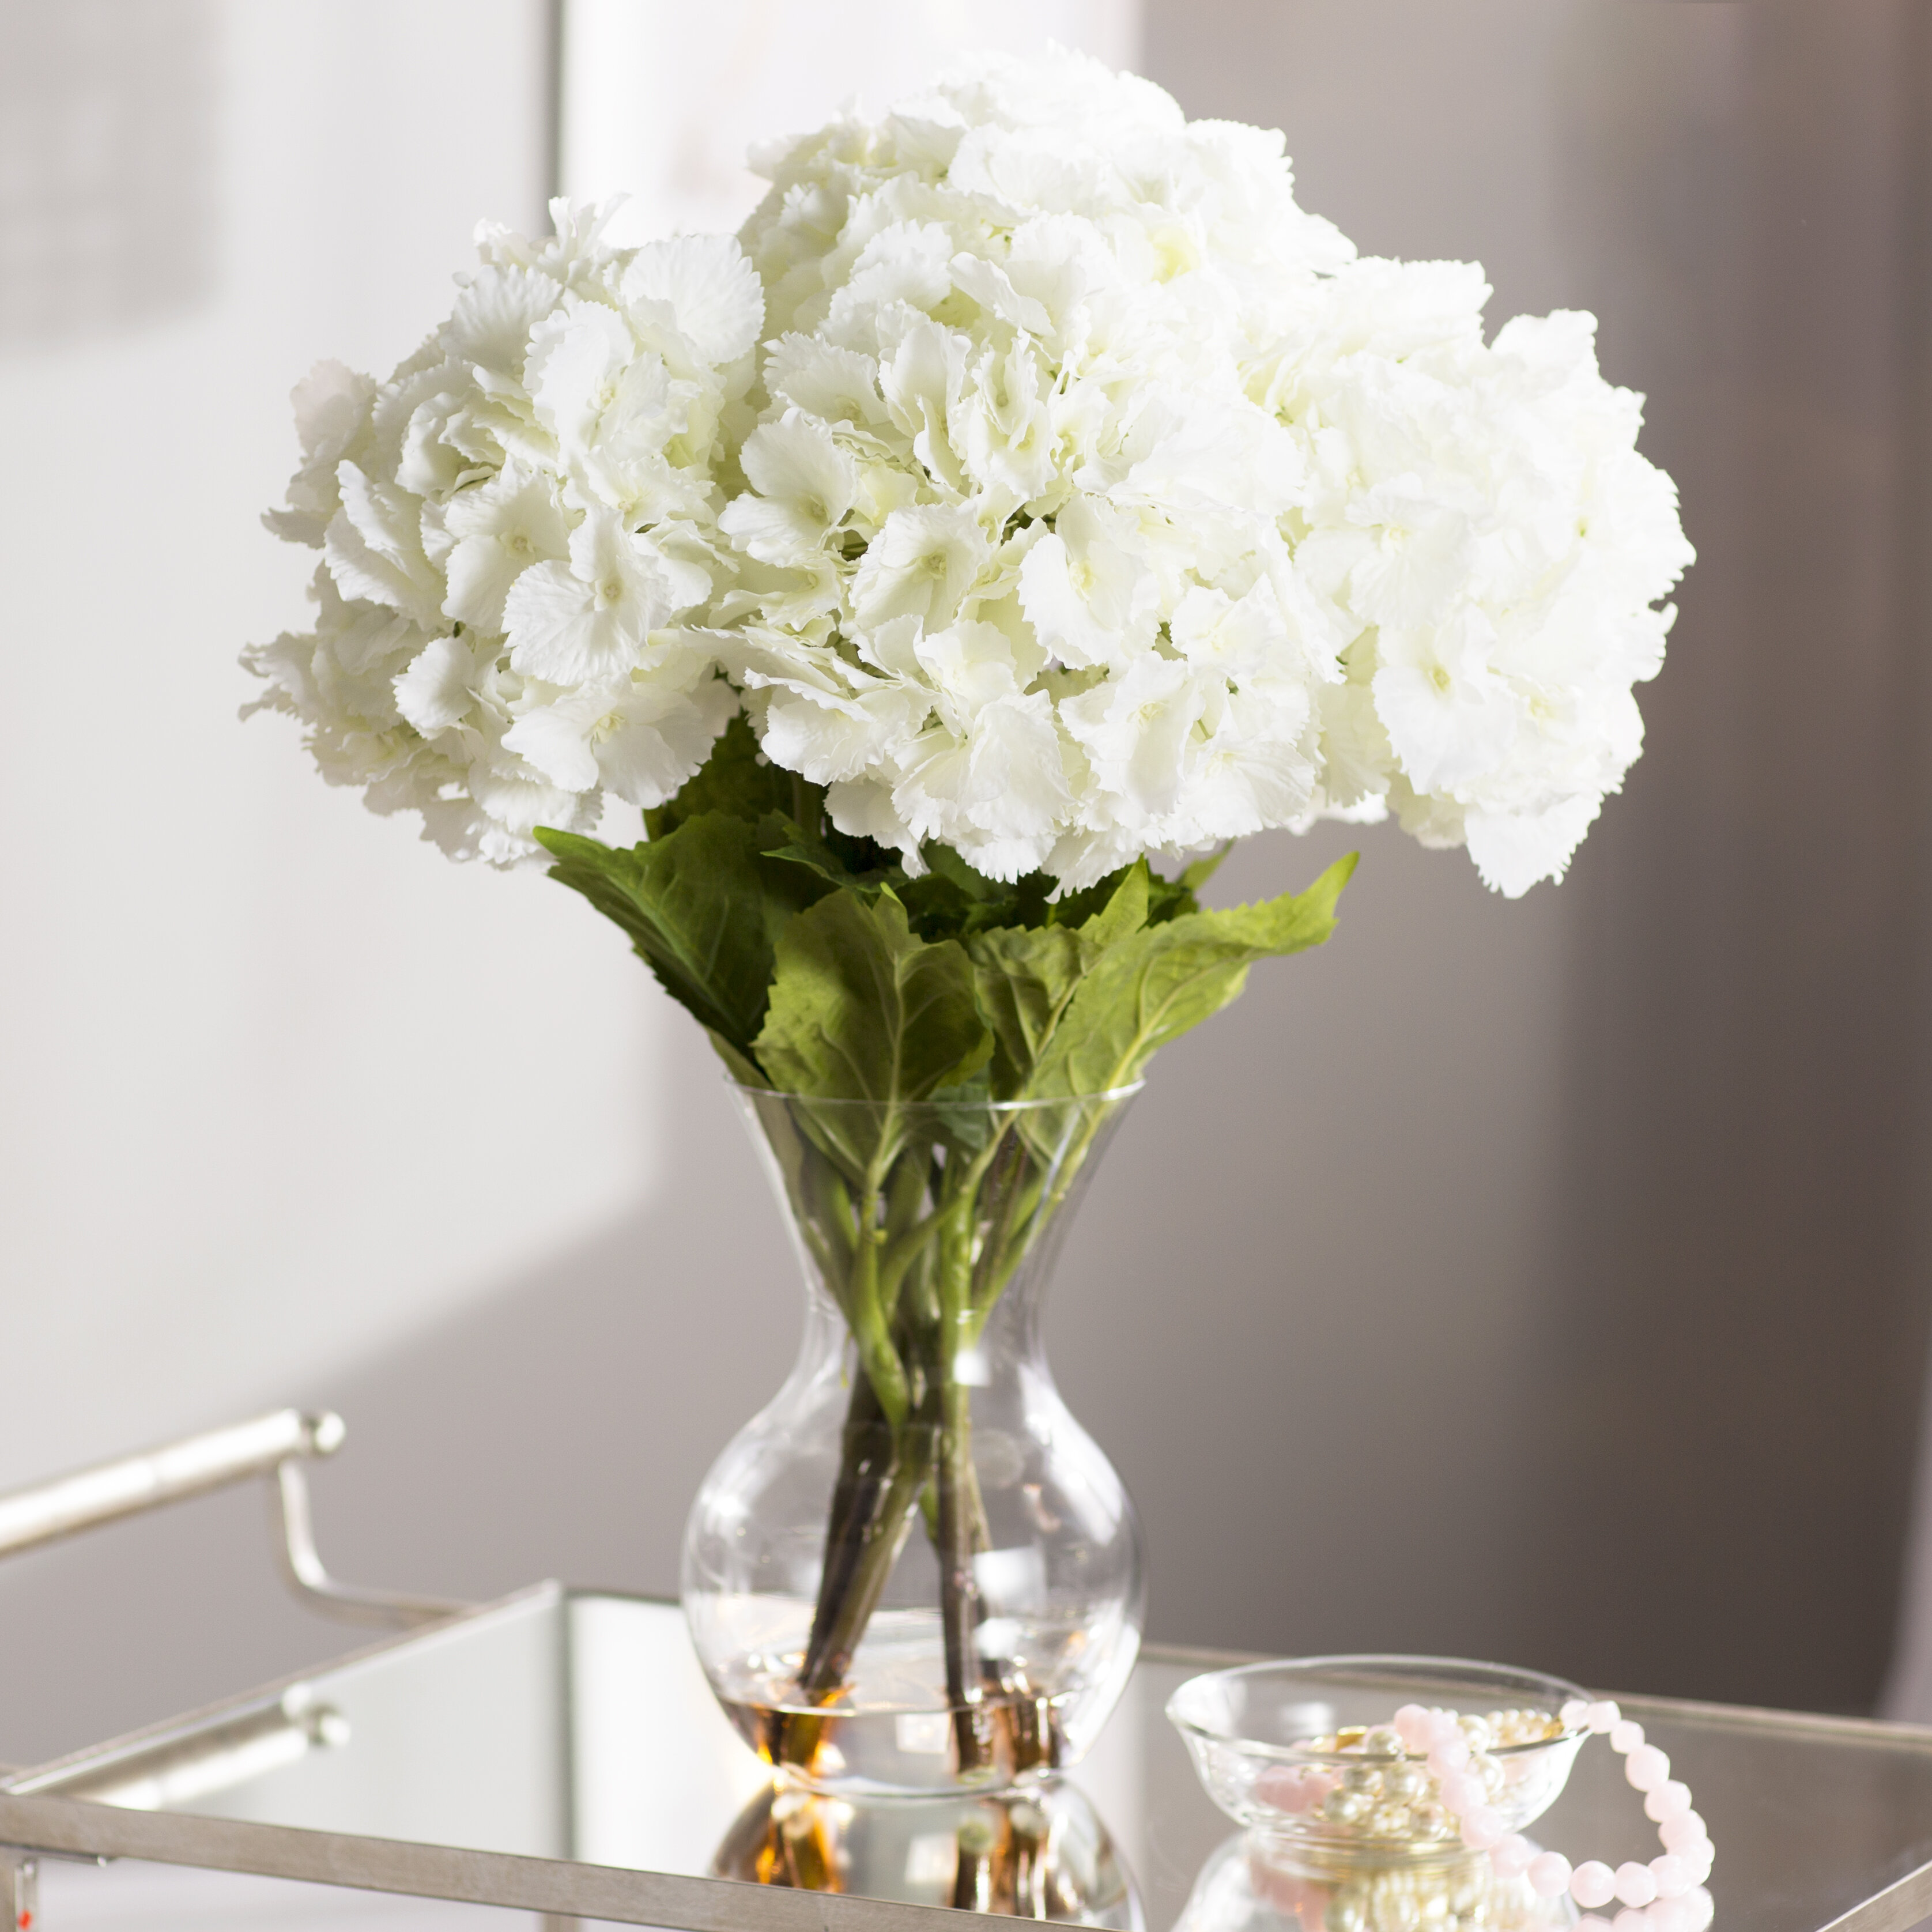 LARGE ARTIFICIAL FLOWERS ARRANGEMENT WHITE HYDRANGEAS IN TALL VASE WITH WATER 